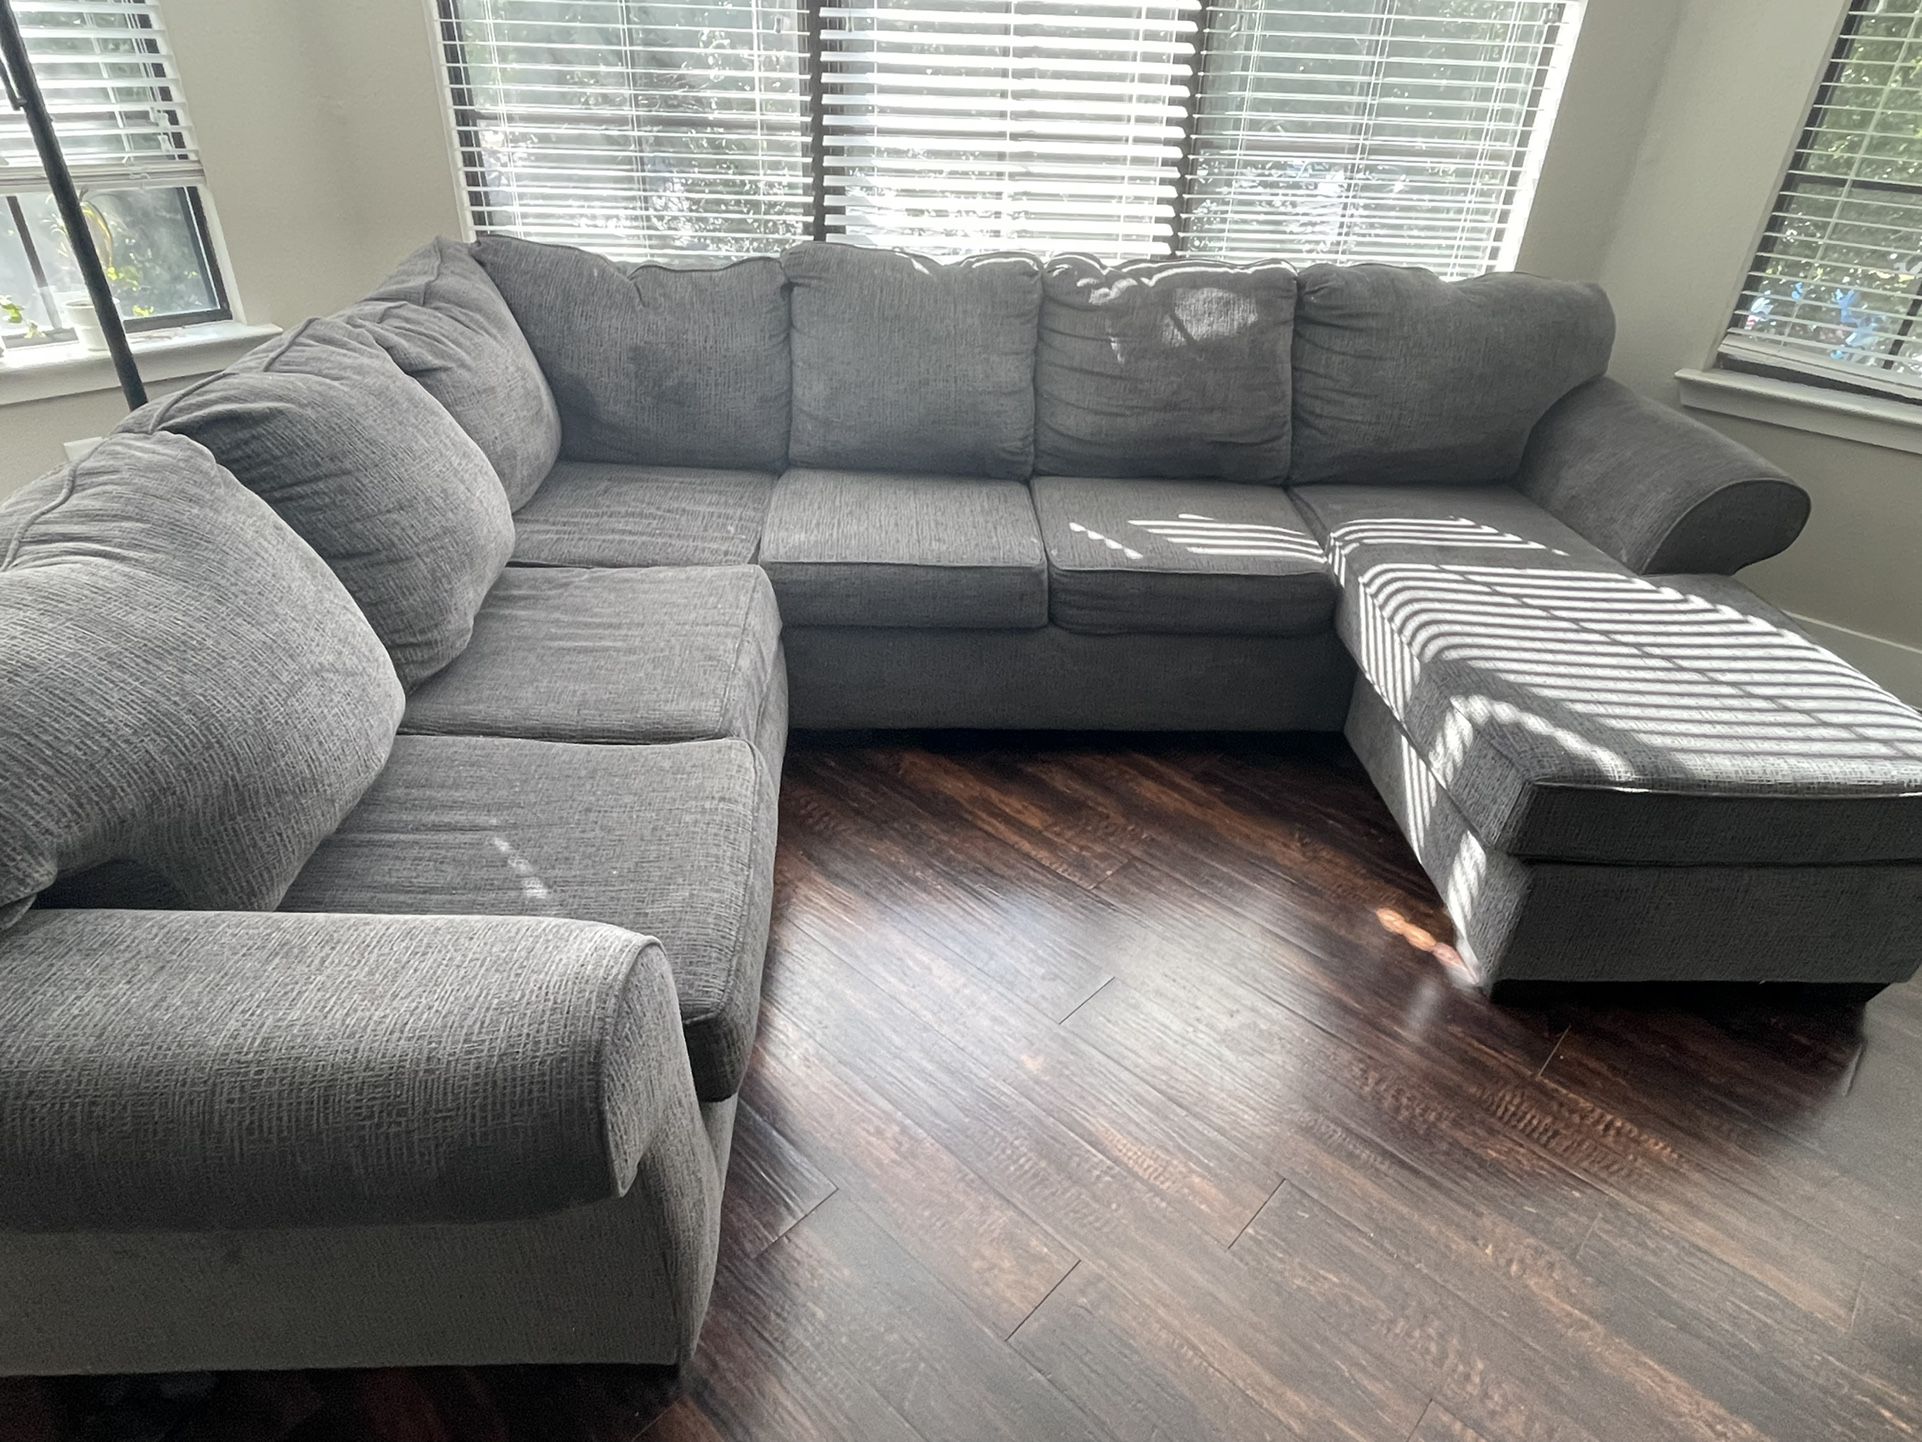 Super Comfortable Like New Sectional